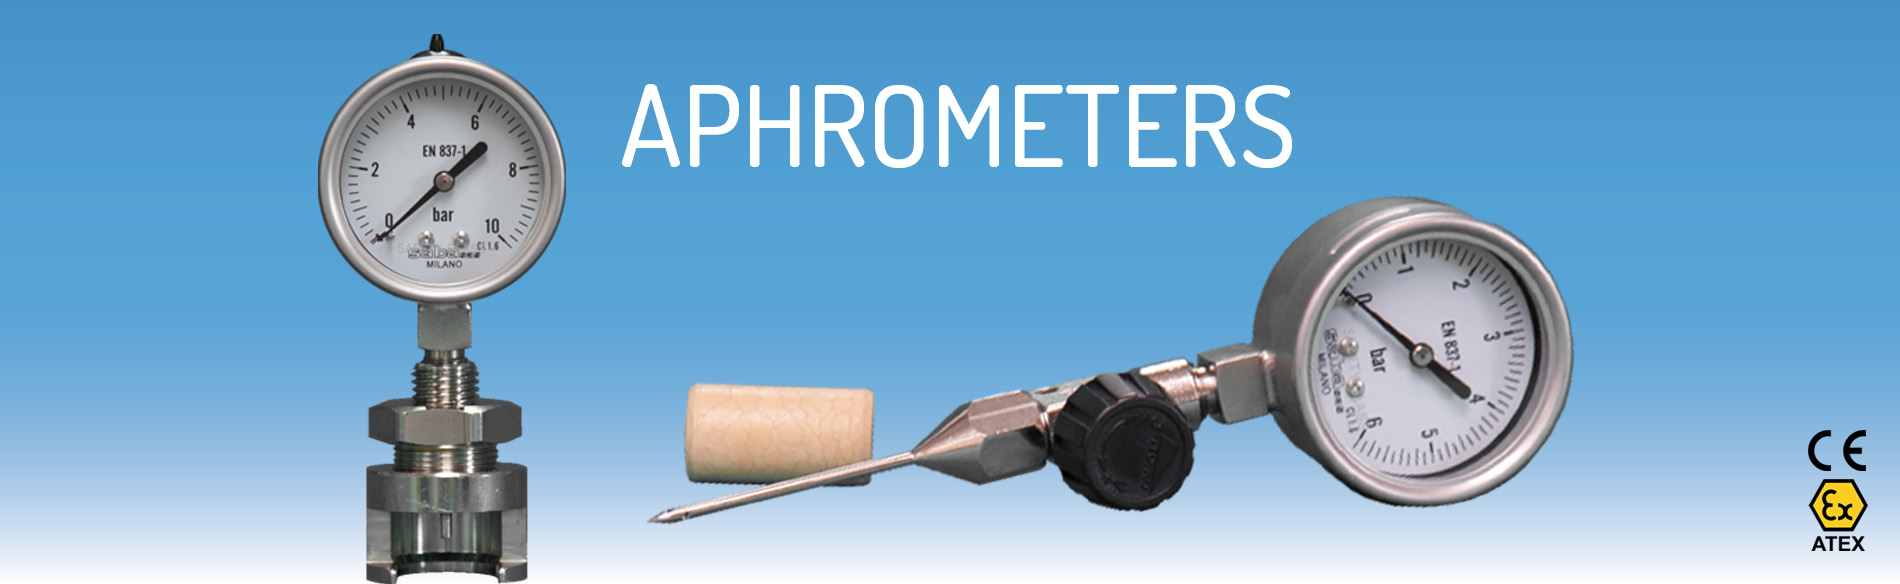 Aphrometer for crown cap and bootles